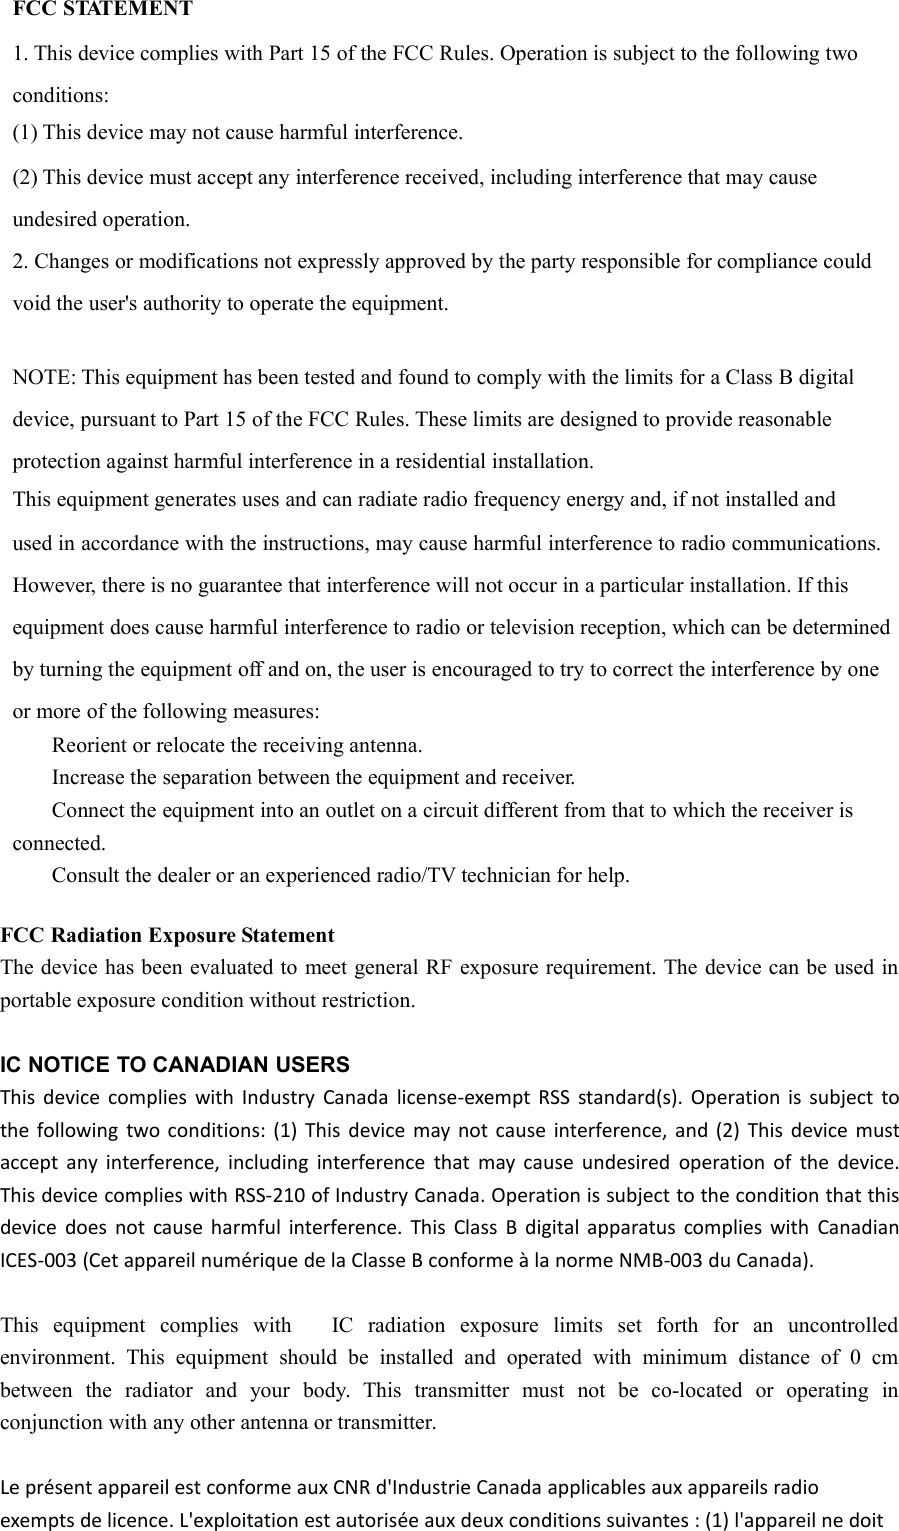 FCC STATEMENT1. This device complies with Part 15 of the FCC Rules. Operation is subject to the following twoconditions:(1) This device may not cause harmful interference.(2) This device must accept any interference received, including interference that may causeundesired operation.2. Changes or modifications not expressly approved by the party responsible for compliance couldvoid the user&apos;s authority to operate the equipment.NOTE: This equipment has been tested and found to comply with the limits for a Class B digitaldevice, pursuant to Part 15 of the FCC Rules. These limits are designed to provide reasonableprotection against harmful interference in a residential installation.This equipment generates uses and can radiate radio frequency energy and, if not installed andused in accordance with the instructions, may cause harmful interference to radio communications.However, there is no guarantee that interference will not occur in a particular installation. If thisequipment does cause harmful interference to radio or television reception, which can be determinedby turning the equipment off and on, the user is encouraged to try to correct the interference by oneor more of the following measures:Reorient or relocate the receiving antenna.Increase the separation between the equipment and receiver.Connect the equipment into an outlet on a circuit different from that to which the receiver isconnected.Consult the dealer or an experienced radio/TV technician for help.FCC Radiation Exposure StatementThe device has been evaluated to meet general RF exposure requirement. The device can be used inportable exposure condition without restriction.IC NOTICE TO CANADIAN USERSThis device complies with Industry Canada license-exempt RSS standard(s). Operation is subject tothe following two conditions: (1) This device may not cause interference, and (2) This device mustaccept any interference, including interference that may cause undesired operation of the device.This device complies with RSS-210 of Industry Canada. Operation is subject to the condition that thisdevice does not cause harmful interference. This Class B digital apparatus complies with CanadianICES-003 (Cet appareil numérique de la Classe B conforme à la norme NMB-003 du Canada).This equipment complies with IC radiation exposure limits set forth for an uncontrolledenvironment. This equipment should be installed and operated with minimum distance of 0 cmbetween the radiator and your body. This transmitter must not be co-located or operating inconjunction with any other antenna or transmitter.Le présent appareil est conforme aux CNR d&apos;Industrie Canada applicables aux appareils radioexempts de licence. L&apos;exploitation est autorisée aux deux conditions suivantes : (1) l&apos;appareil ne doit